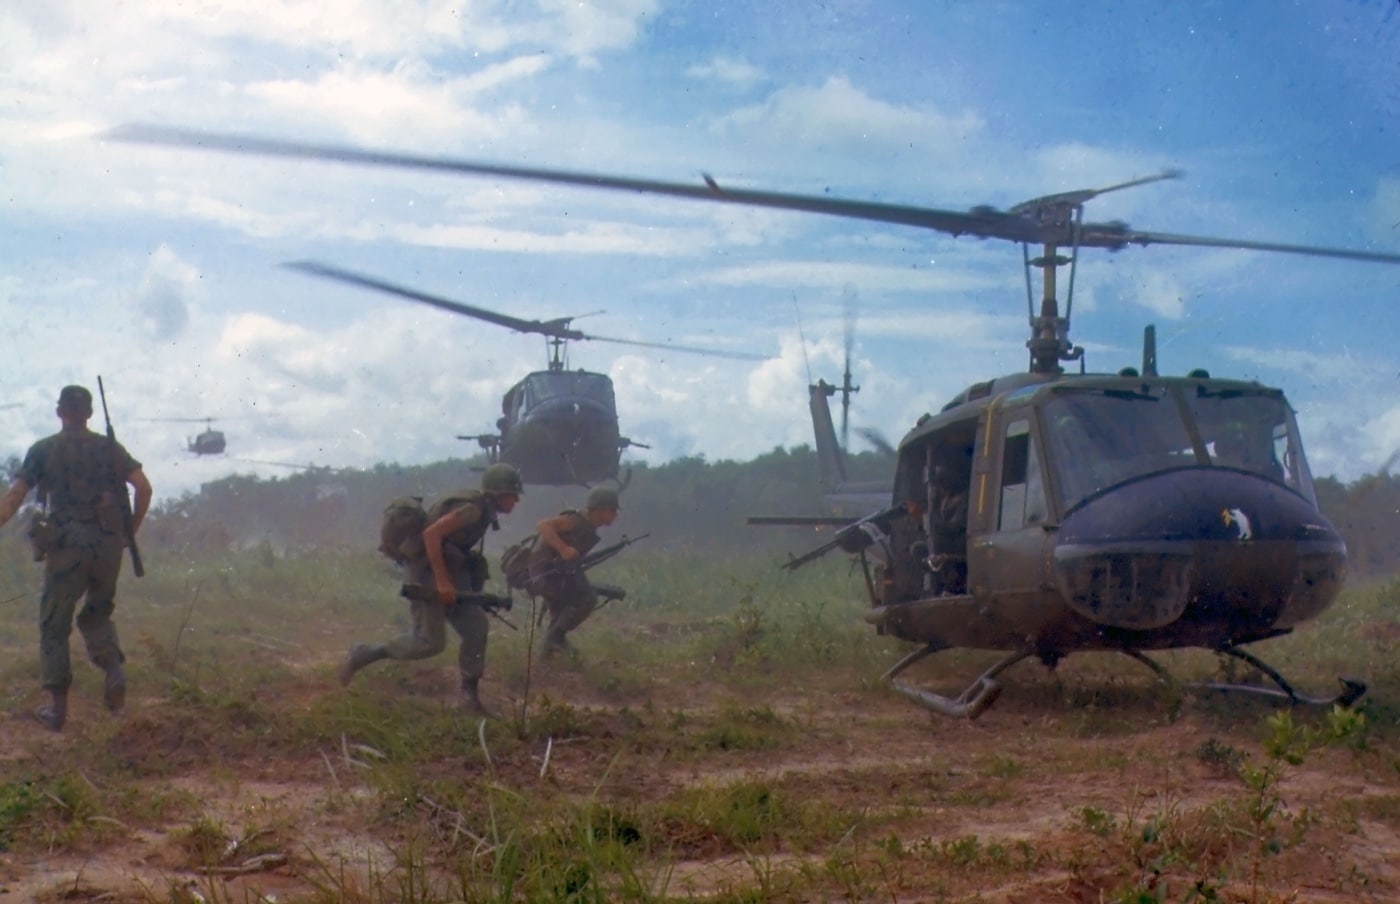 In this image, we see soldiers of the United States Army 25th Infantry Division loading onto Bell UH-1 Iroquois utility helicopters to conduct search and destroy missions in South Vietnam.